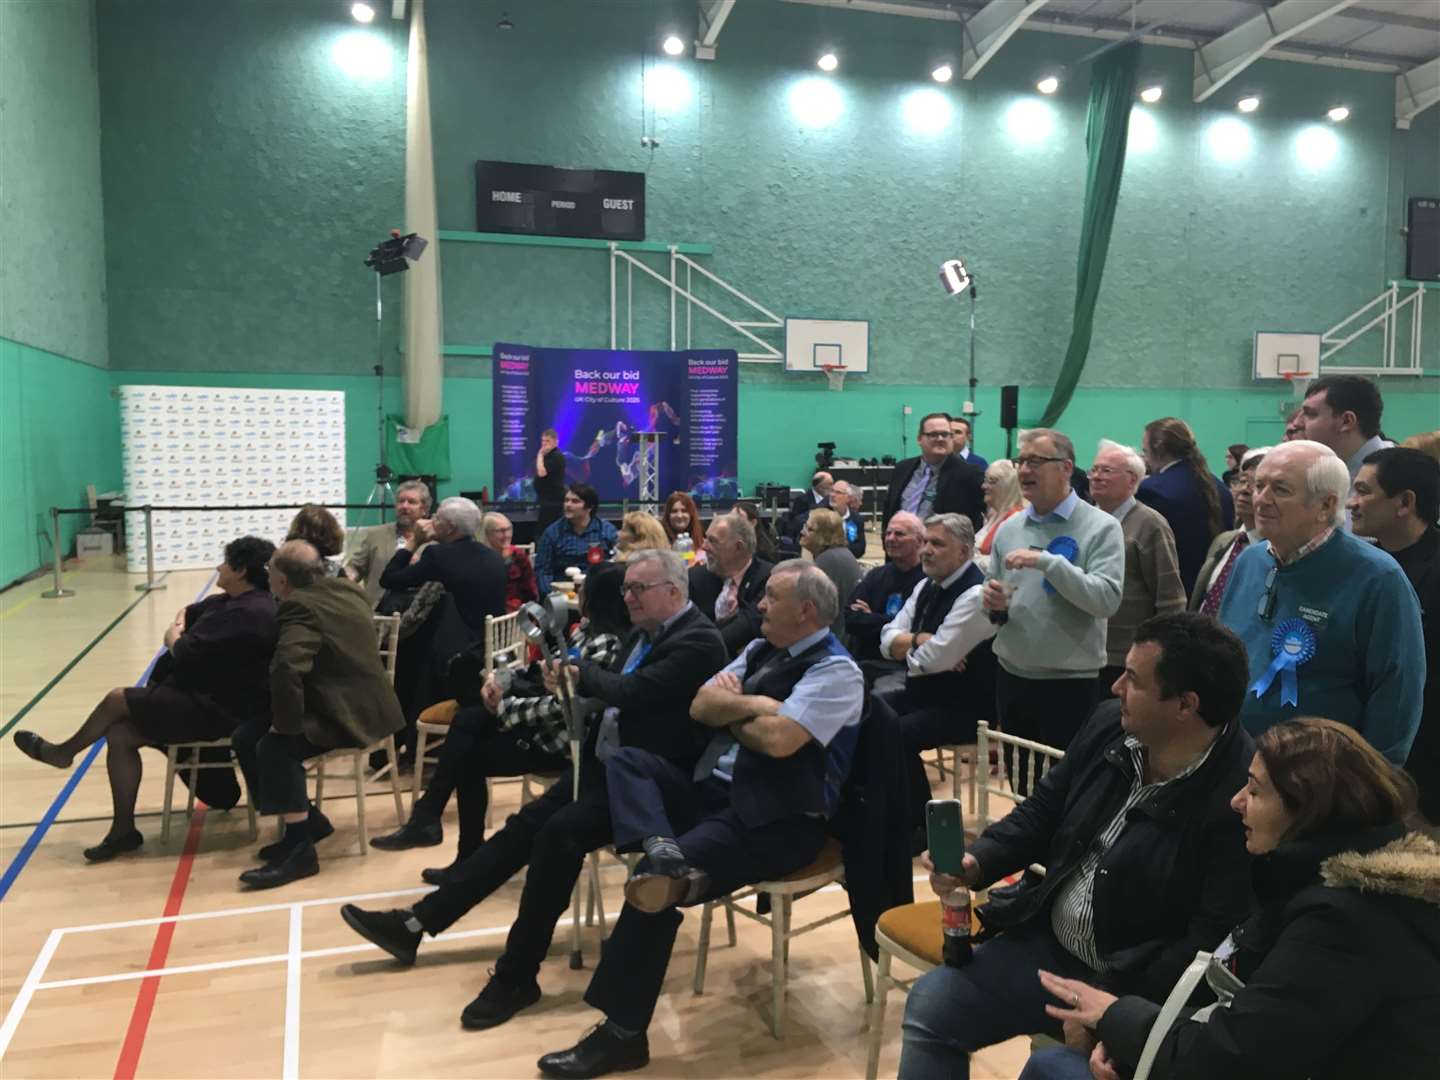 Huge cheers went up as Labour supporters watched the result in Canterbury with Rosie Duffield retaining her seat - the only bright moment for the party in the county